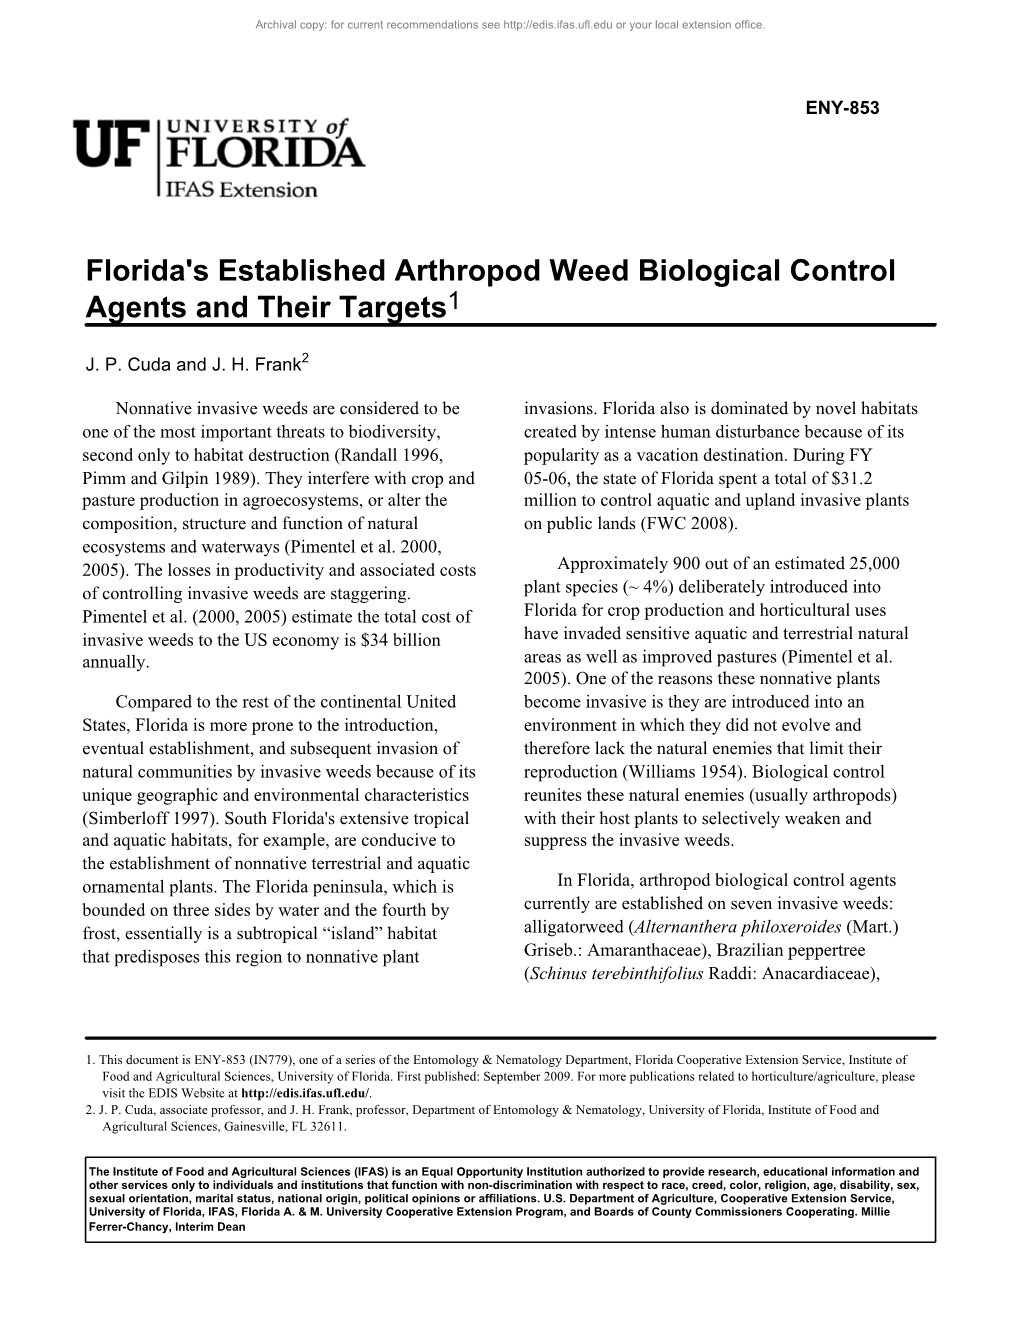 Florida's Established Arthropod Weed Biological Control Agents and Their Targets1